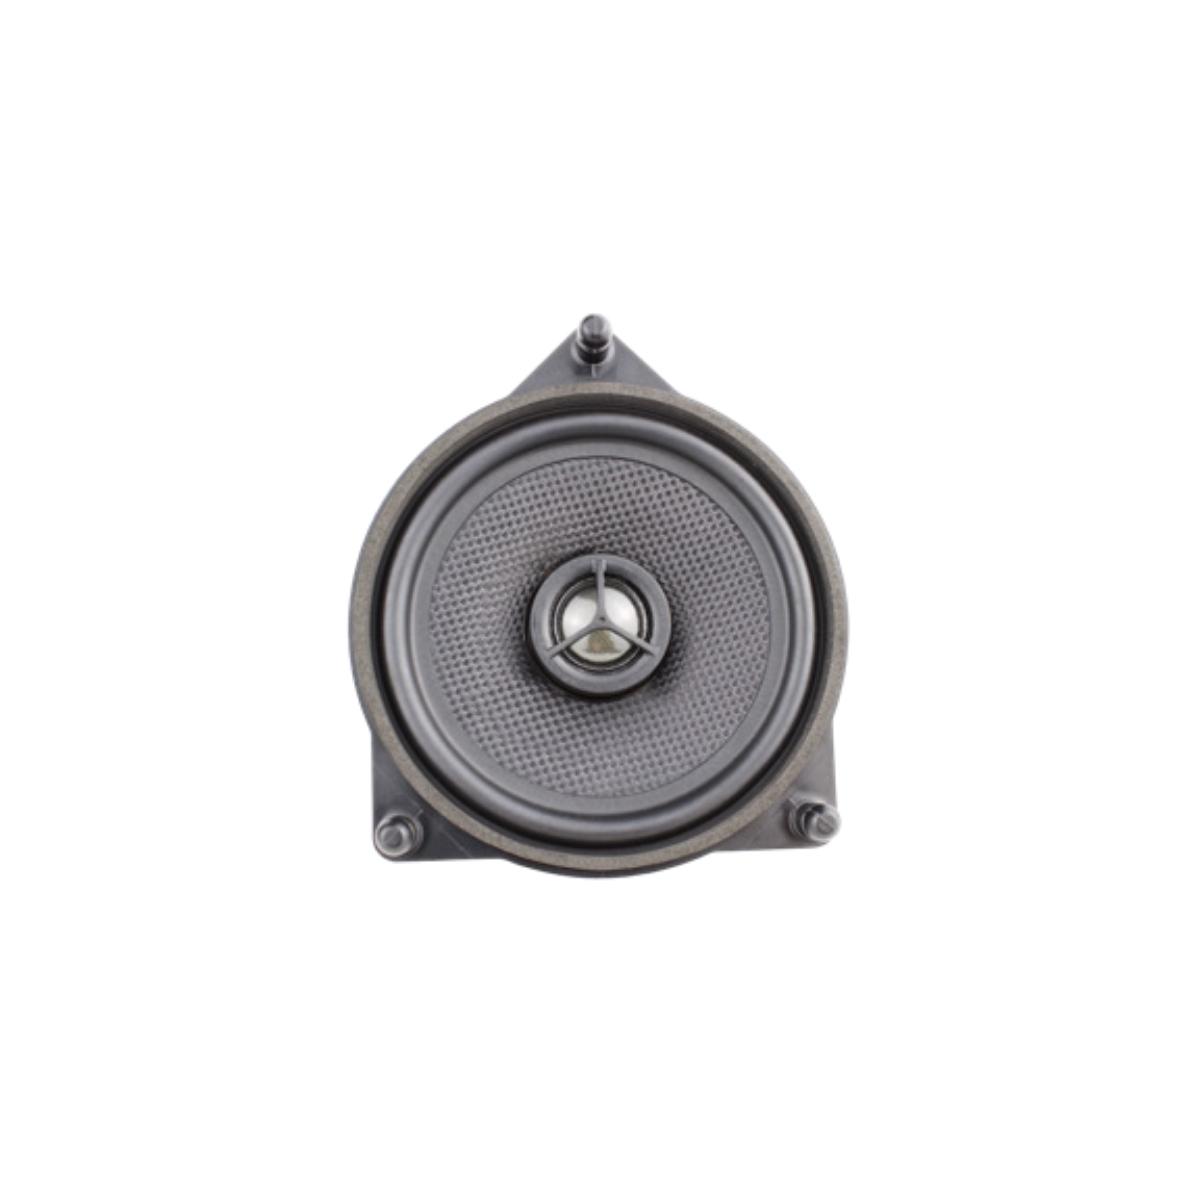 Mercedes Benz® Specific 4" Speakers/8" Subwoofer Complete Replacement Kit